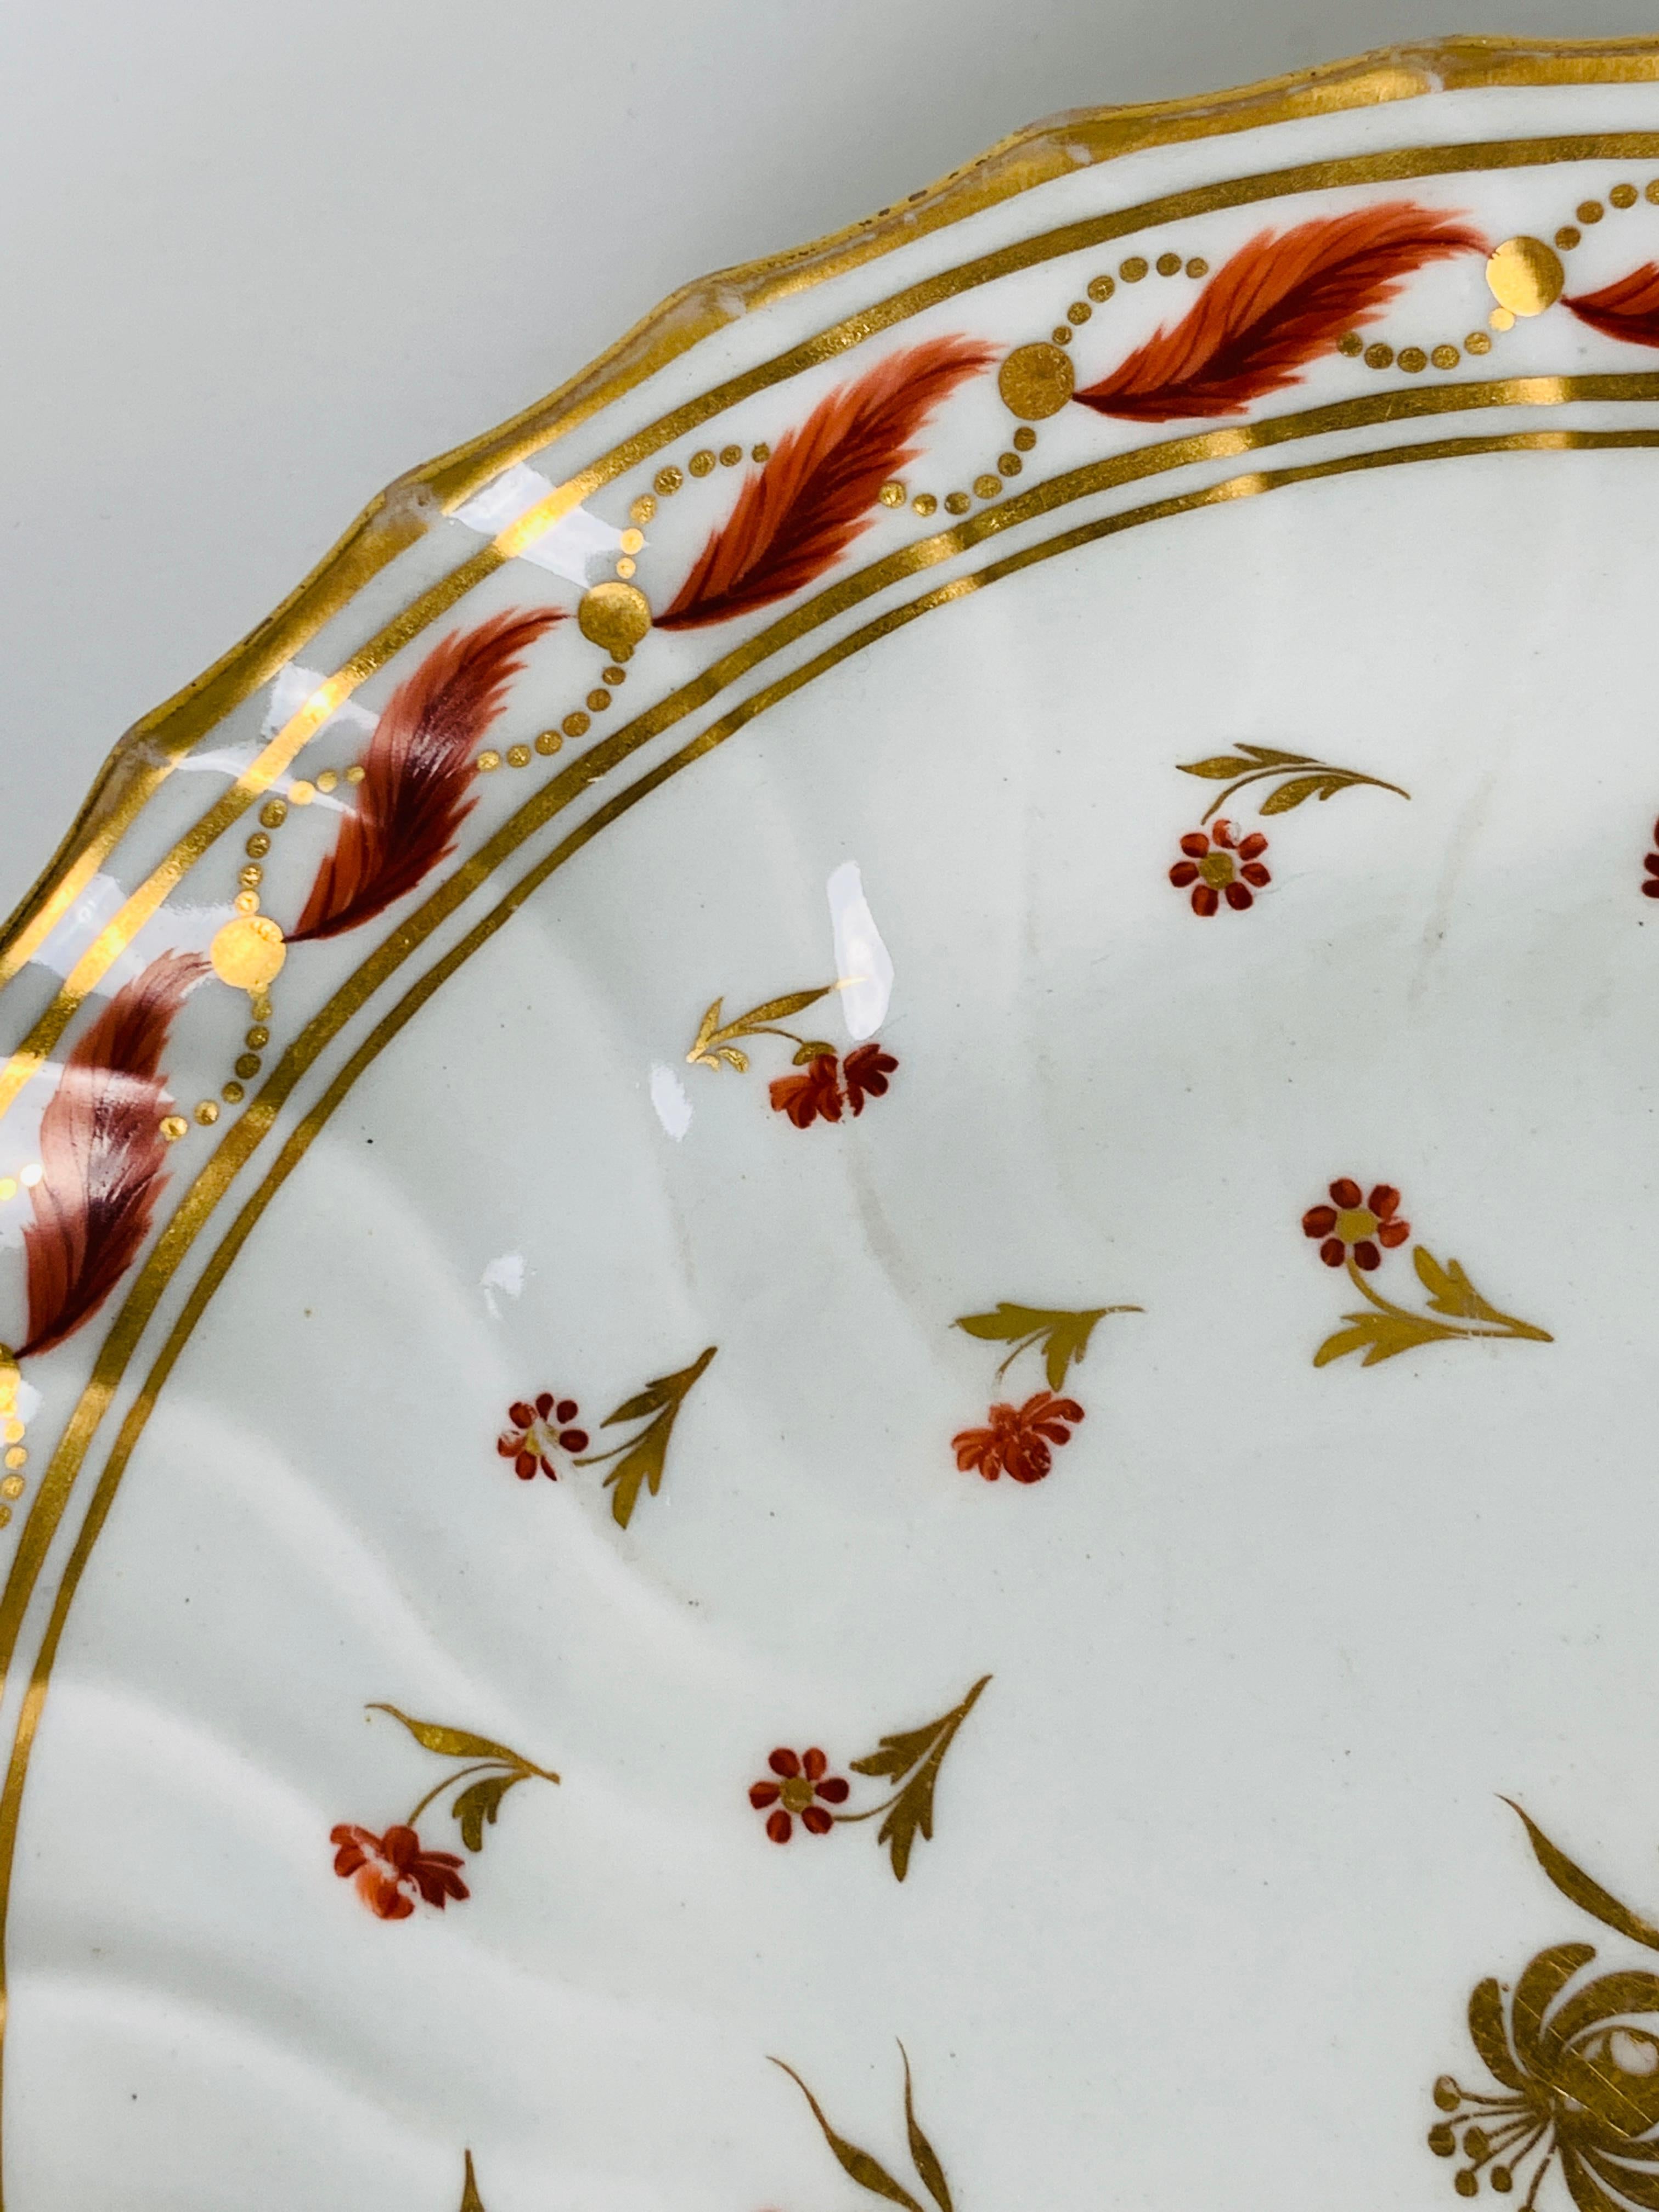 Provenance: The Private Collection of Mario Buatta
Made in England circa 1820, this elegant and beautiful saucer dish has fluting which seems to form ripples in the porcelain. 
It is decorated with a single gold flower in the center surrounded by